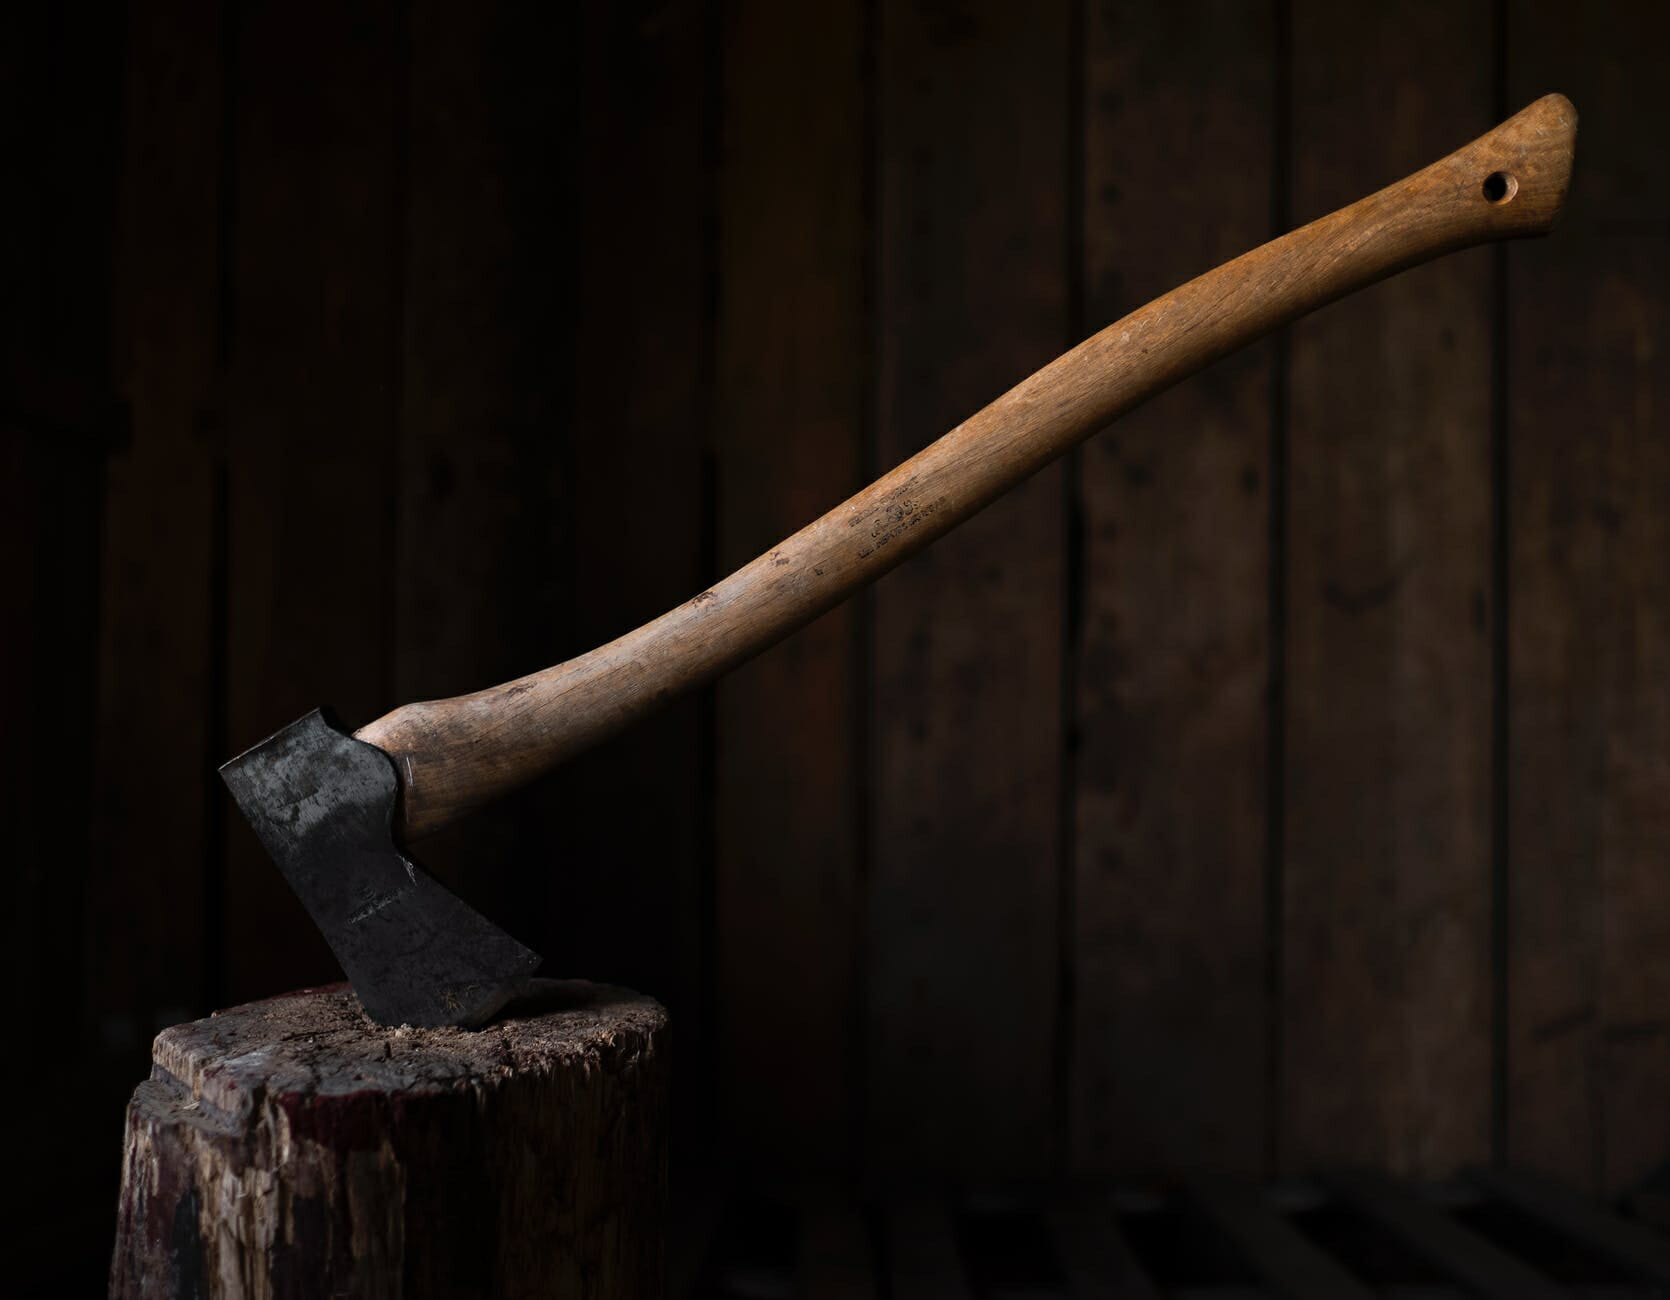 Sharpen the axe with personas